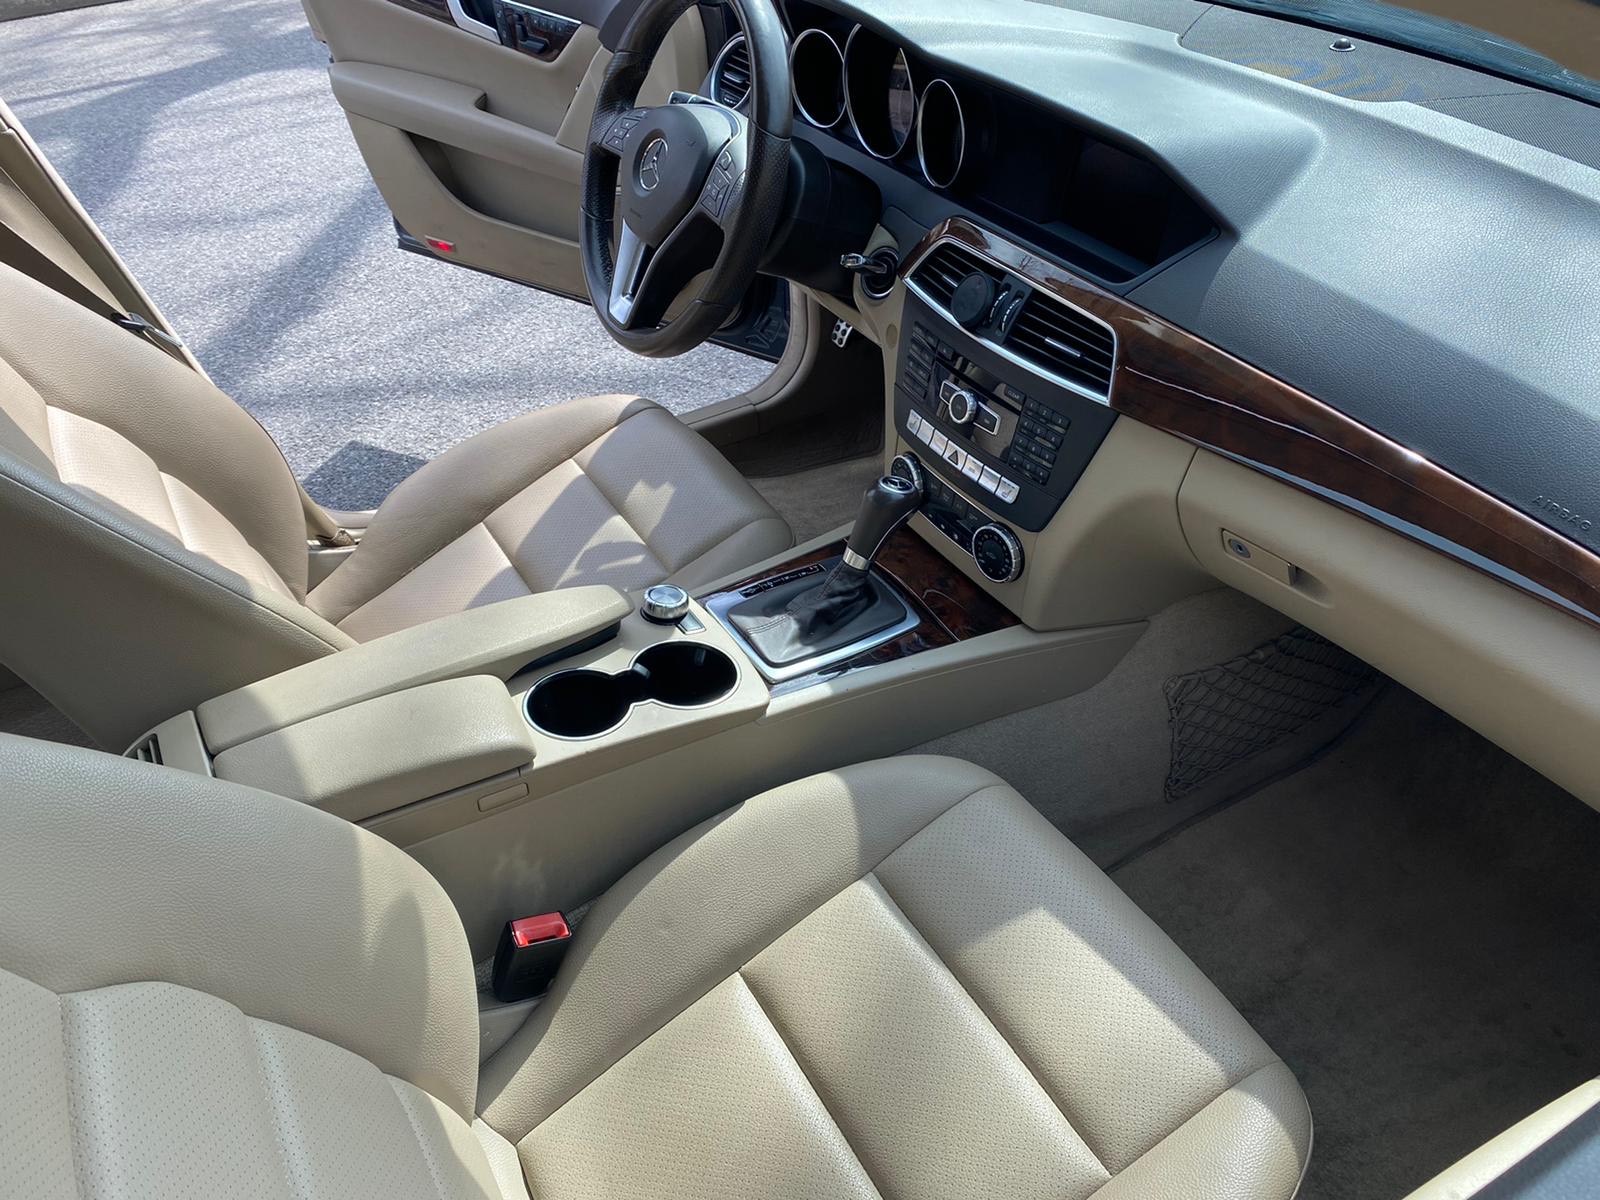 Used - Mercedes-Benz C 300 Luxury 4MATIC AWD Sedan for sale in Staten Island NY